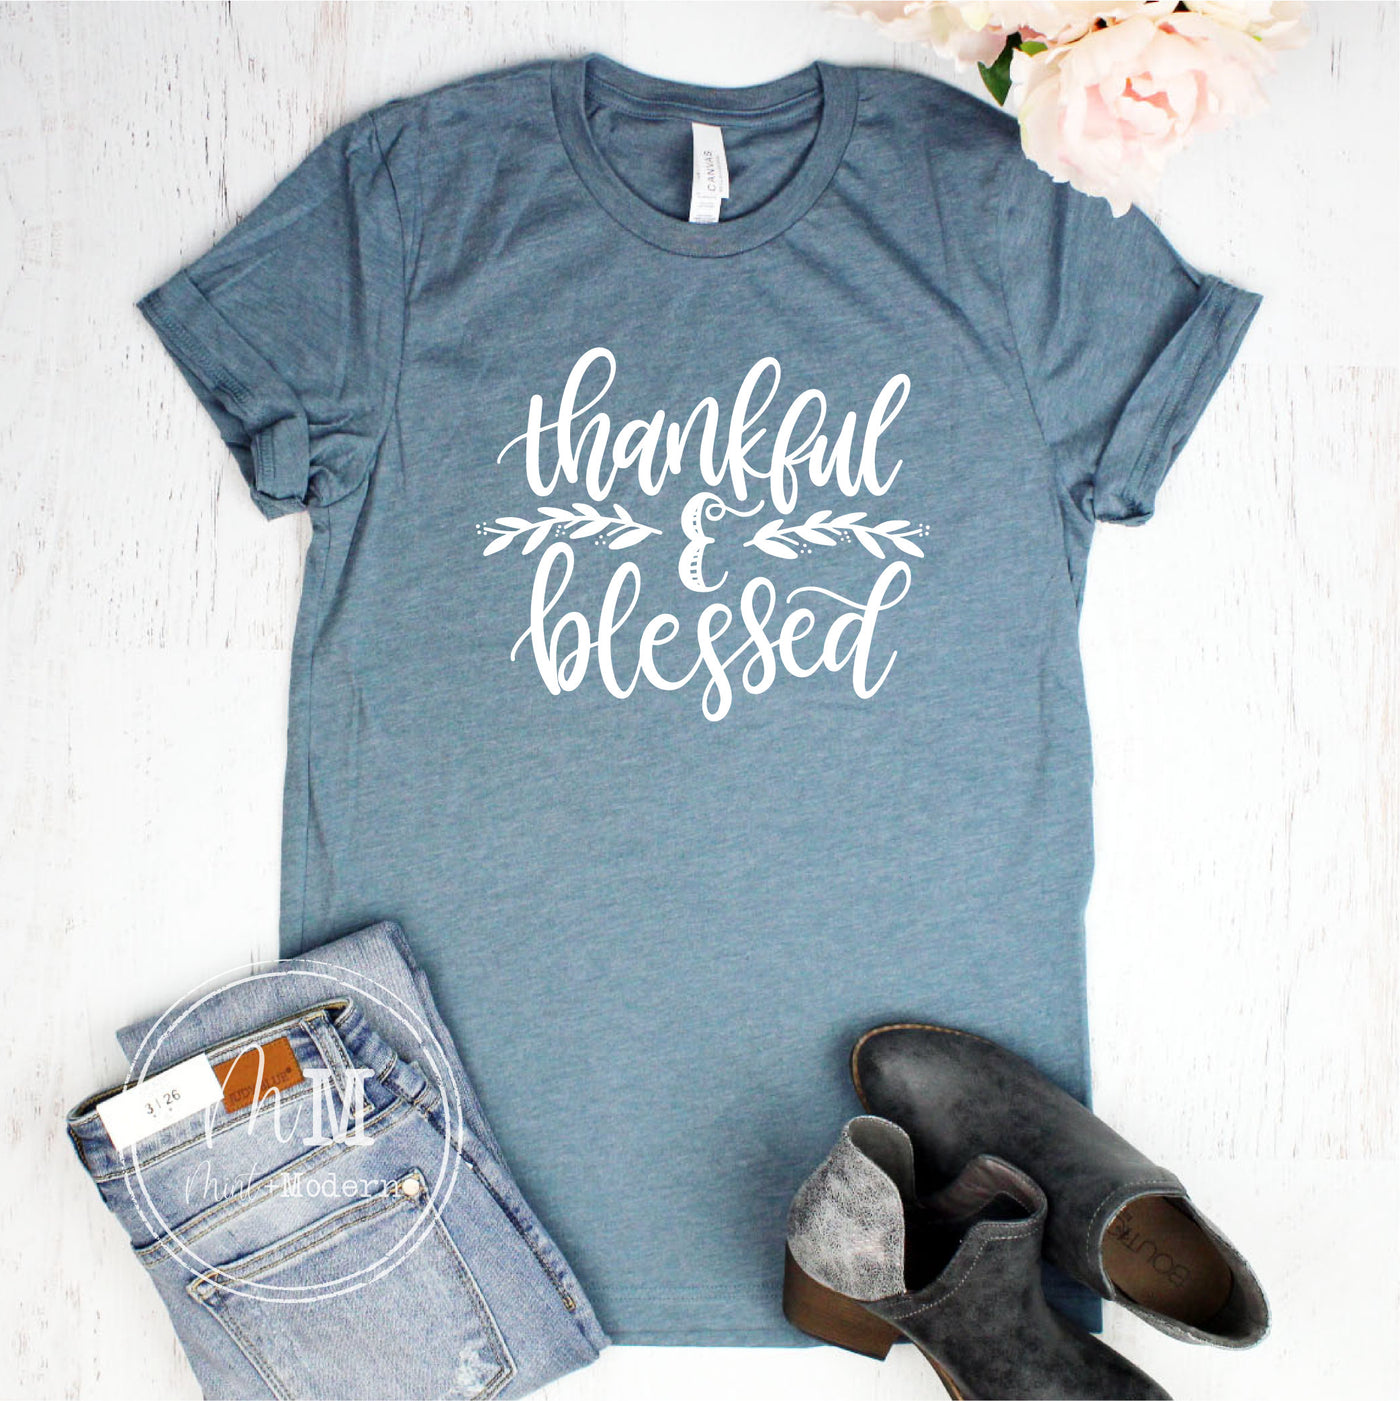 Thankful and Blessed Shirt - Thanksgiving Shirt